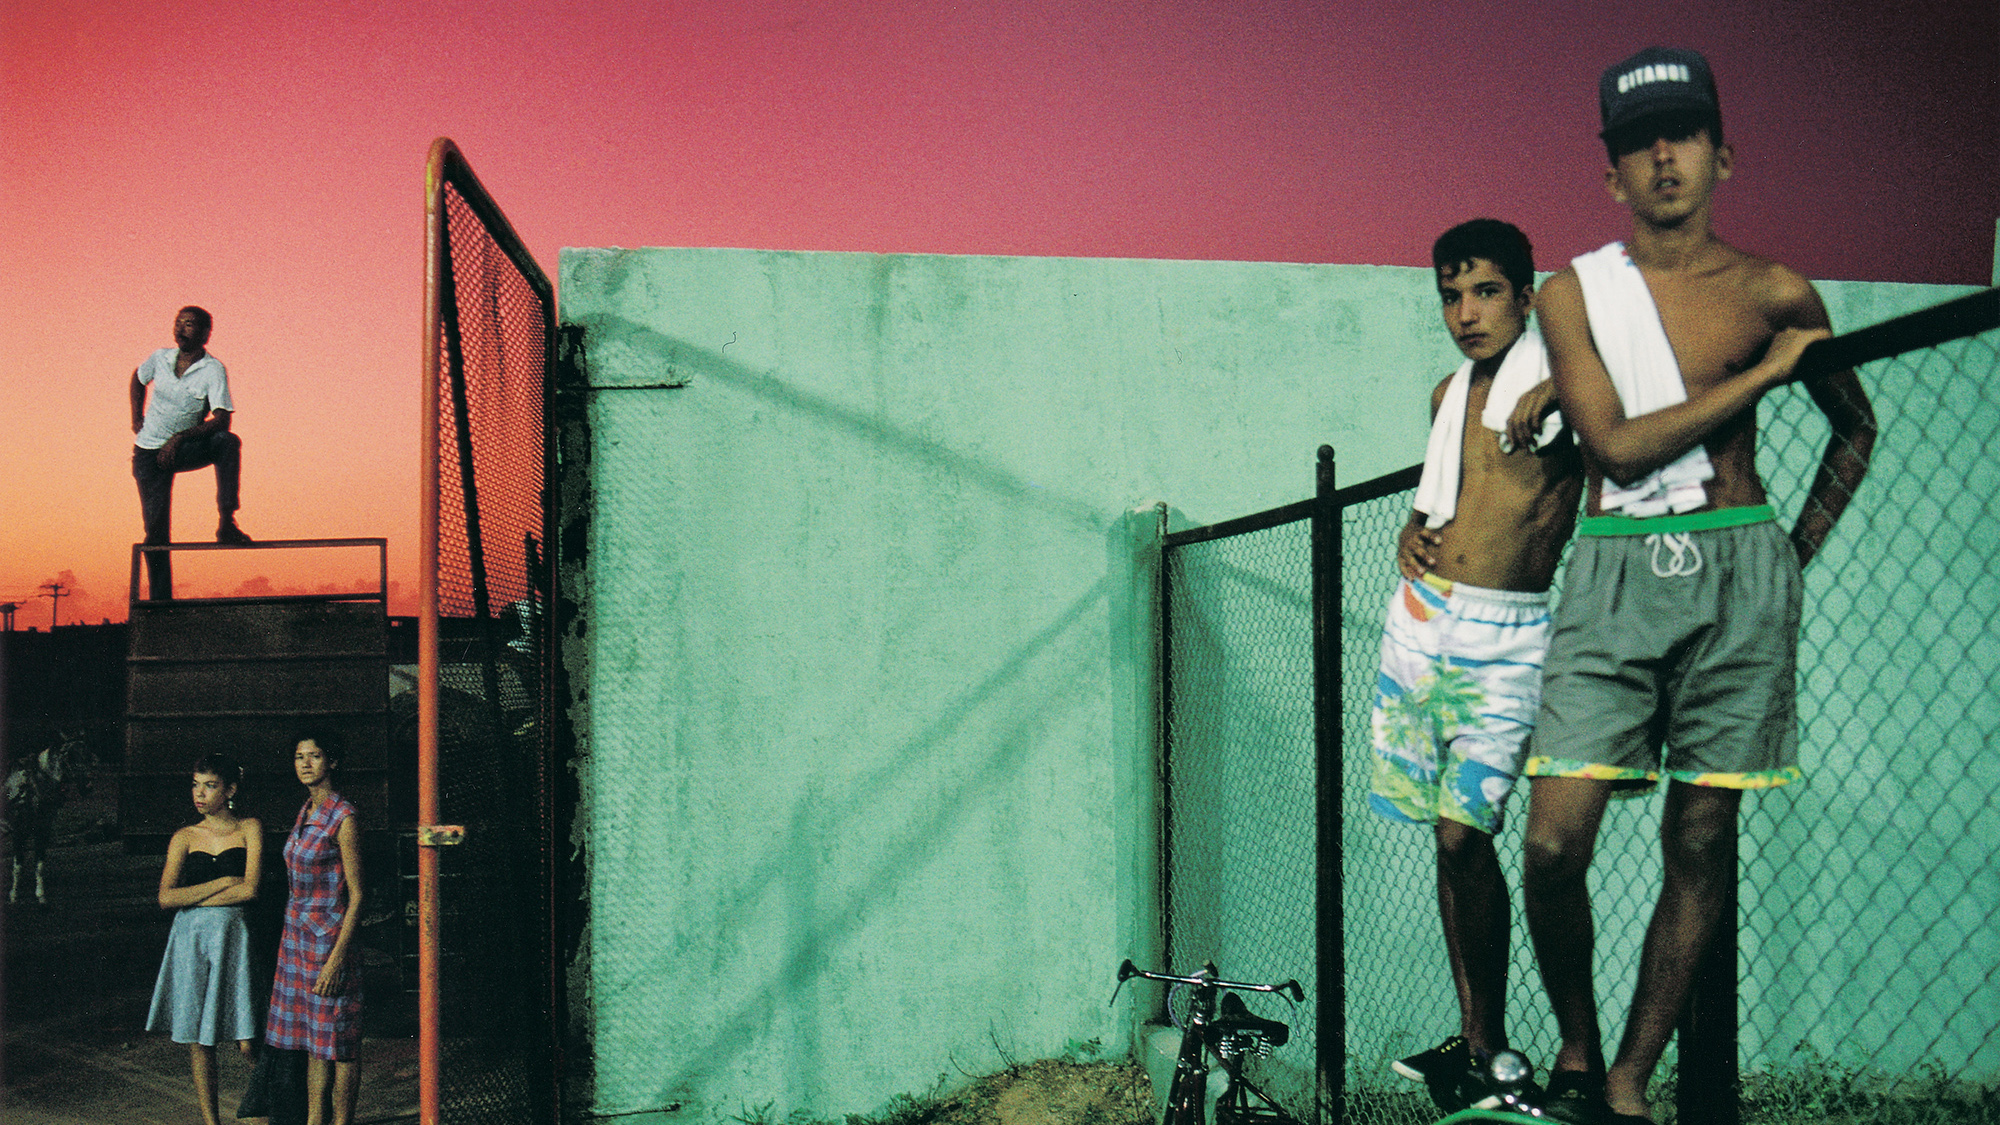 Alex Webb on How Color Photography Changes His Way of Seeing